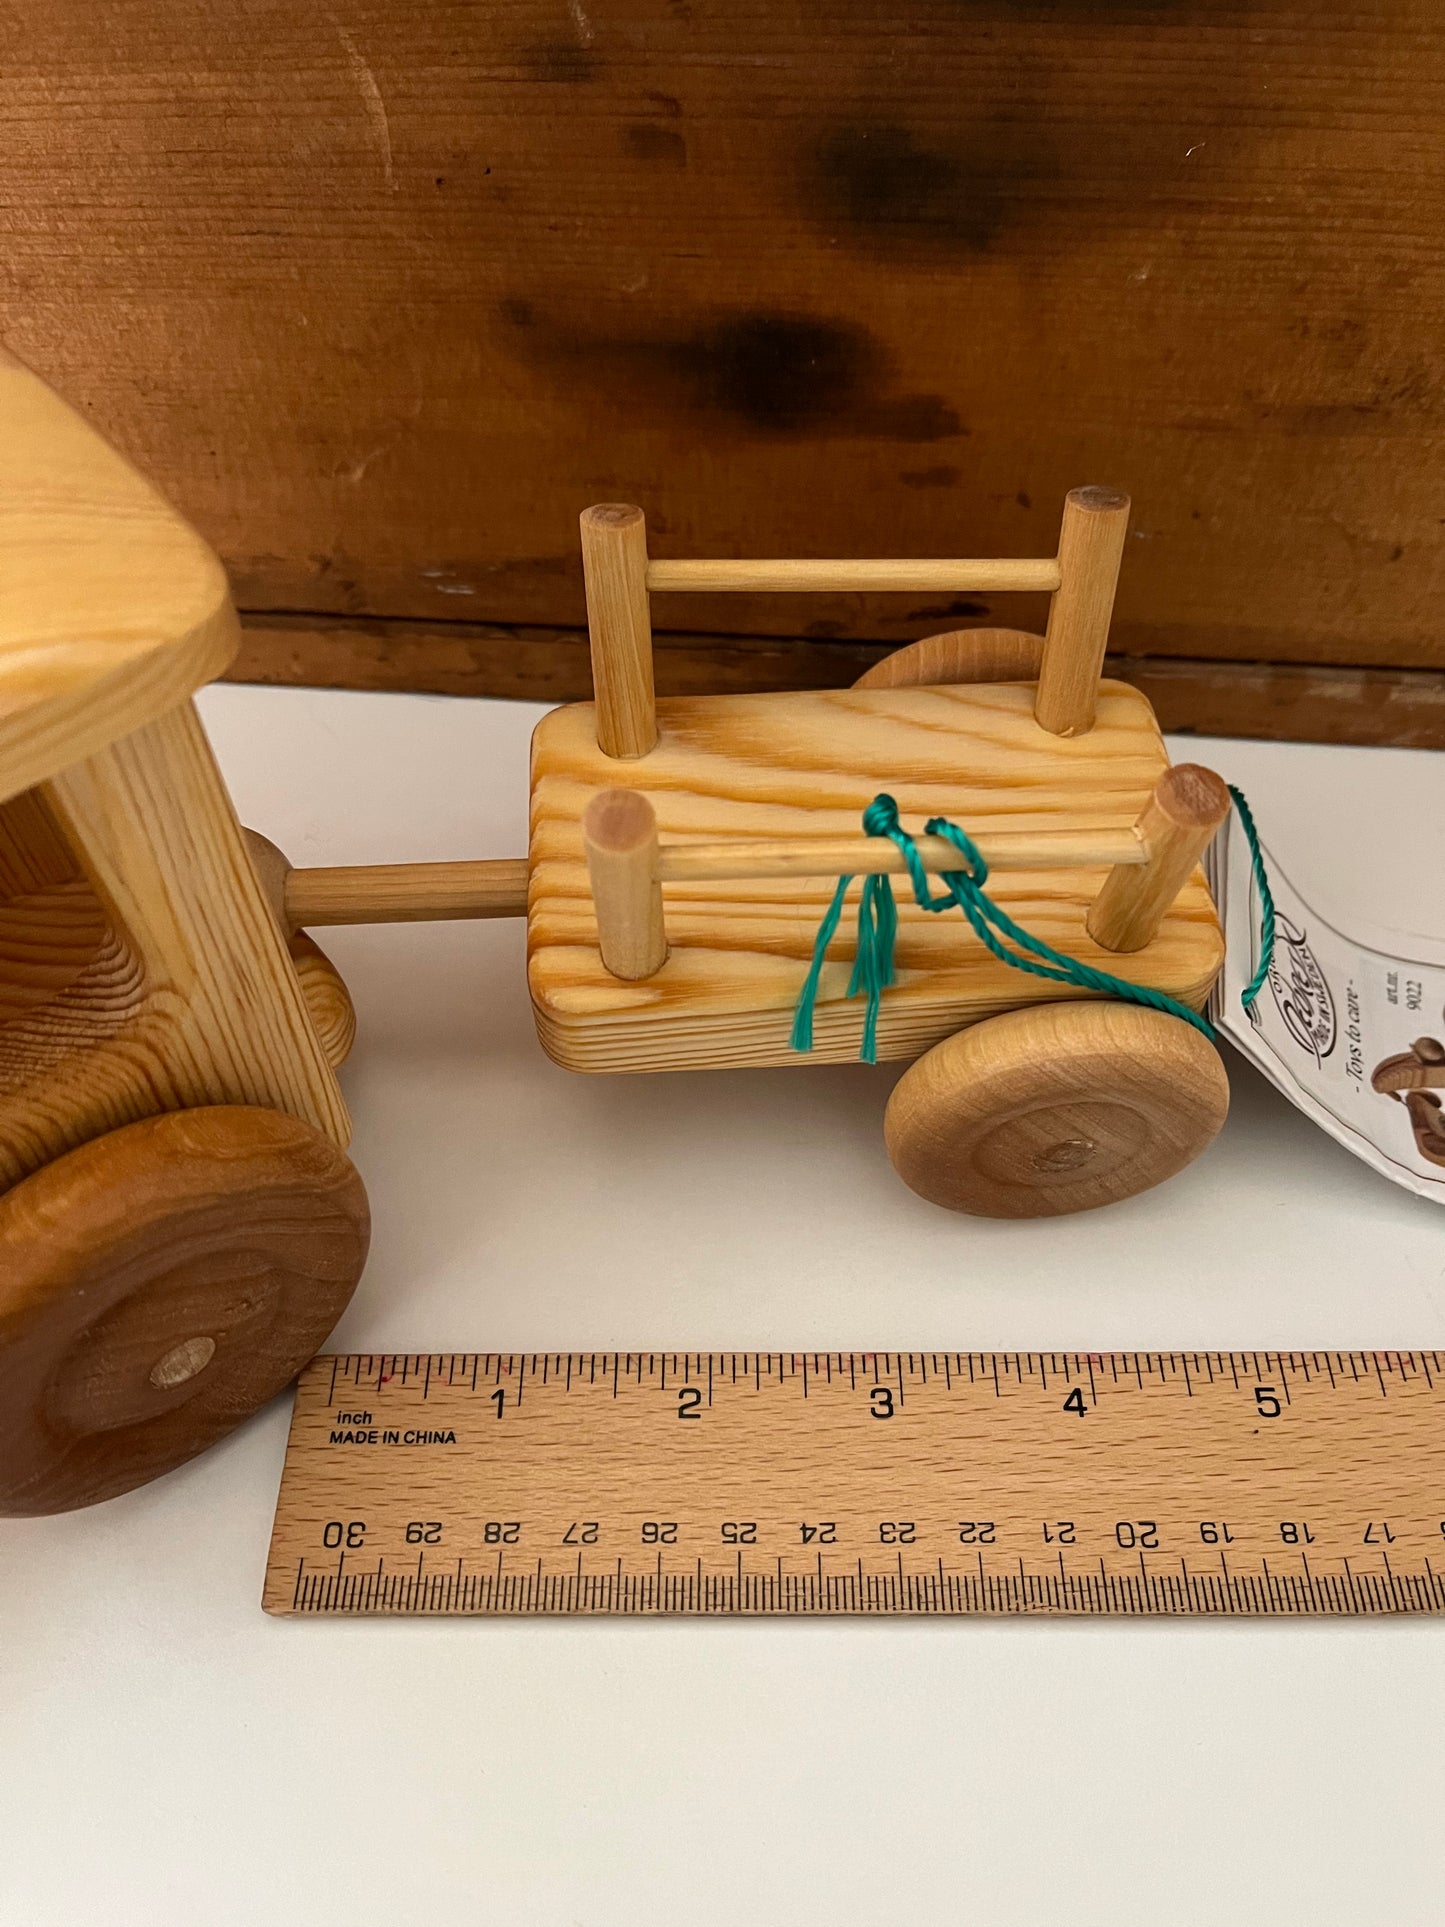 Wooden Toy - ON SALE! Debresk TRACTOR AND WAGON